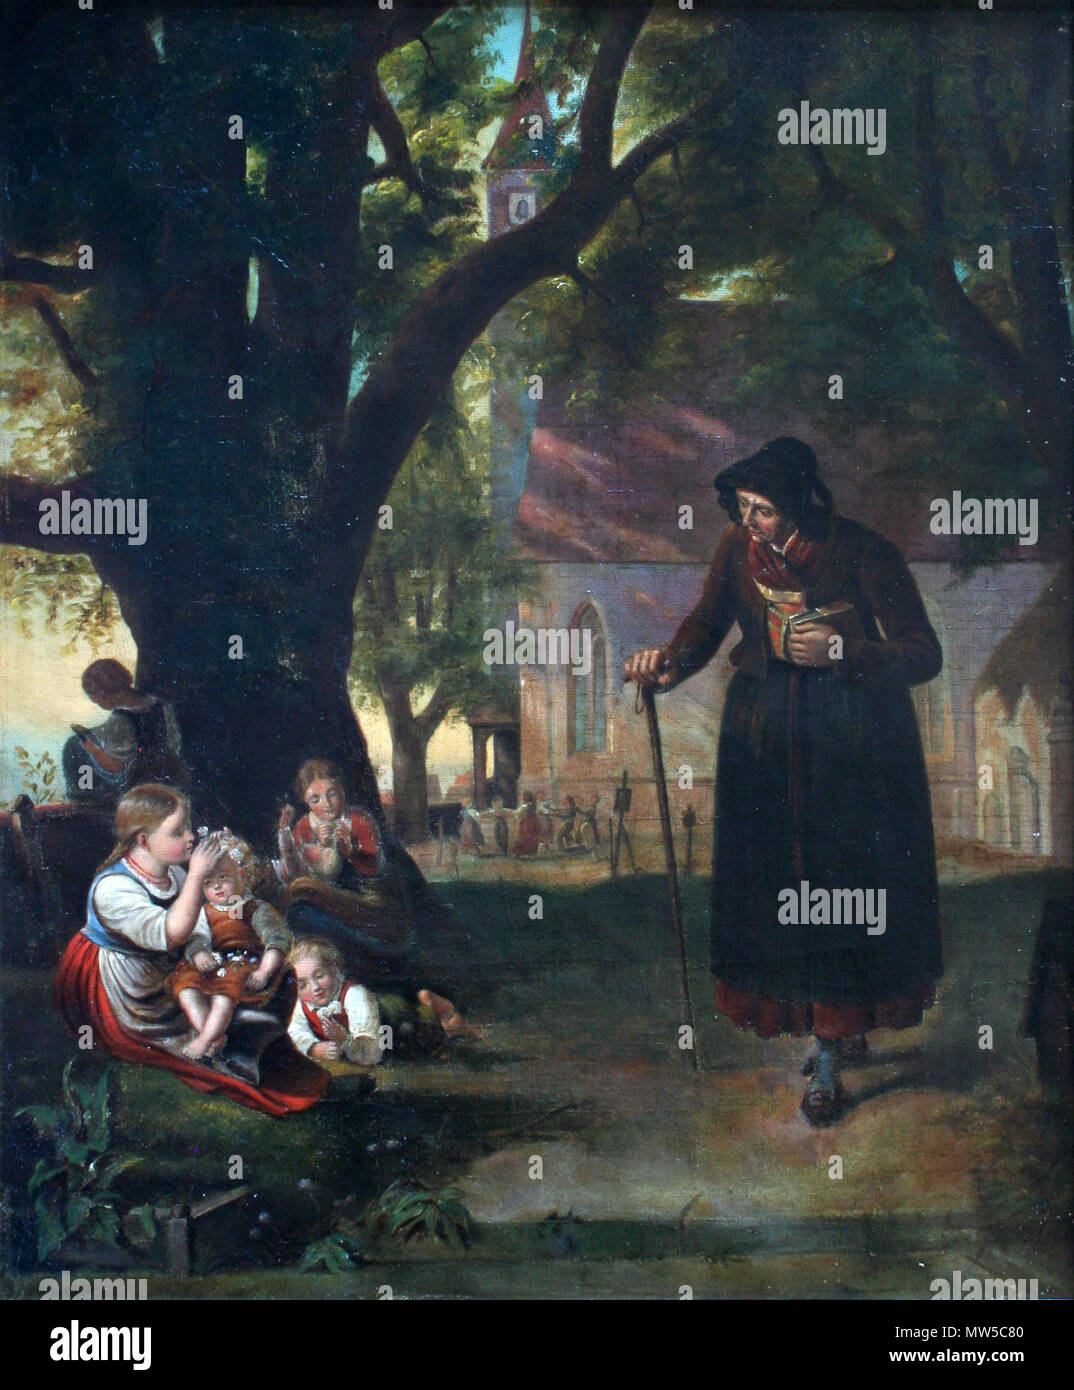 . English: An dour old woman clutching a Bible gazes at some happy children. In the background children play among grave markers in a churchyard. 19th century. Unknown 658 Youth and Old Age Meet Near a Church Stock Photo